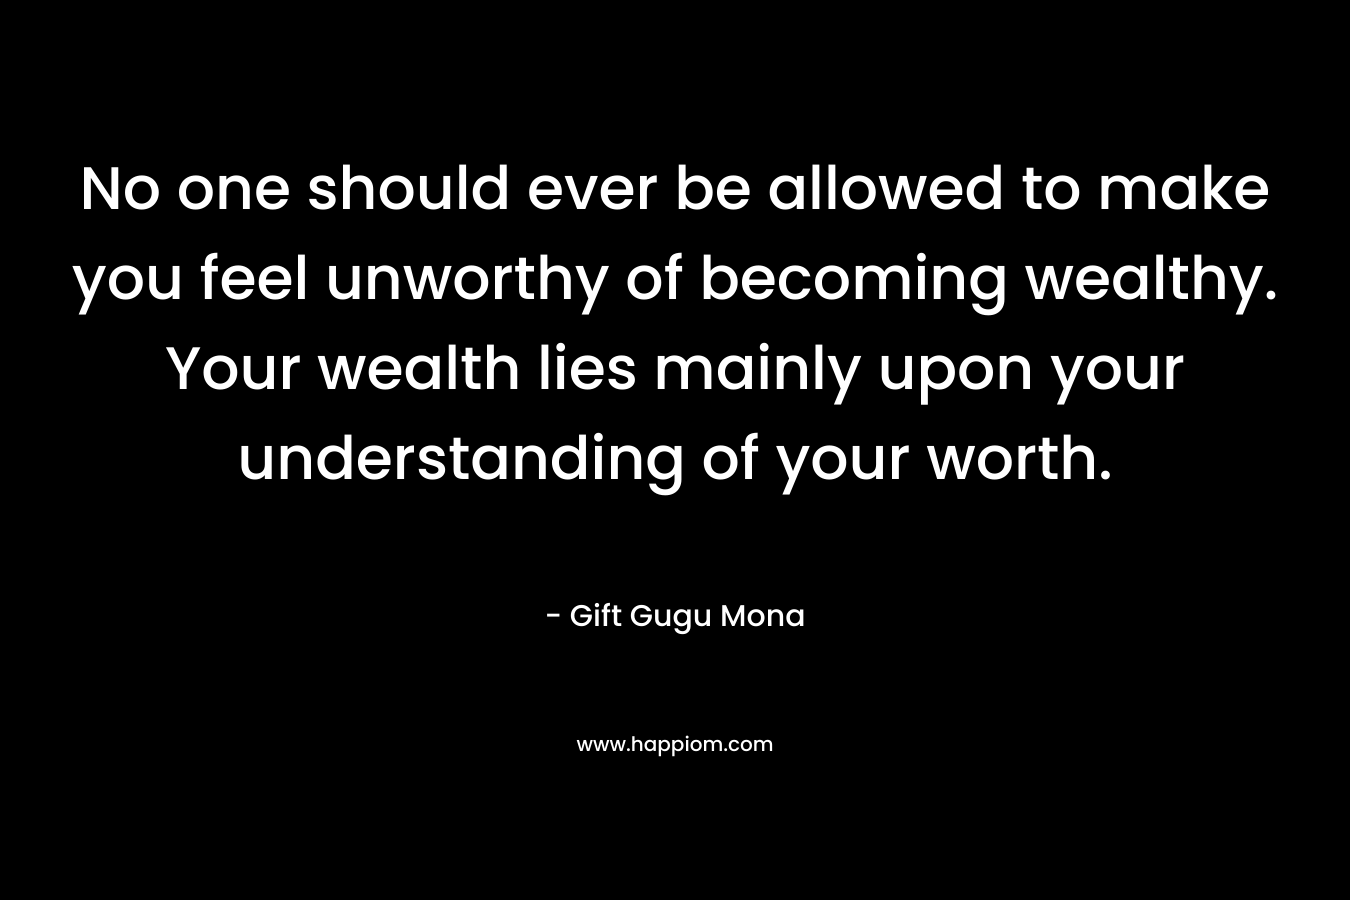 No one should ever be allowed to make you feel unworthy of becoming wealthy. Your wealth lies mainly upon your understanding of your worth.